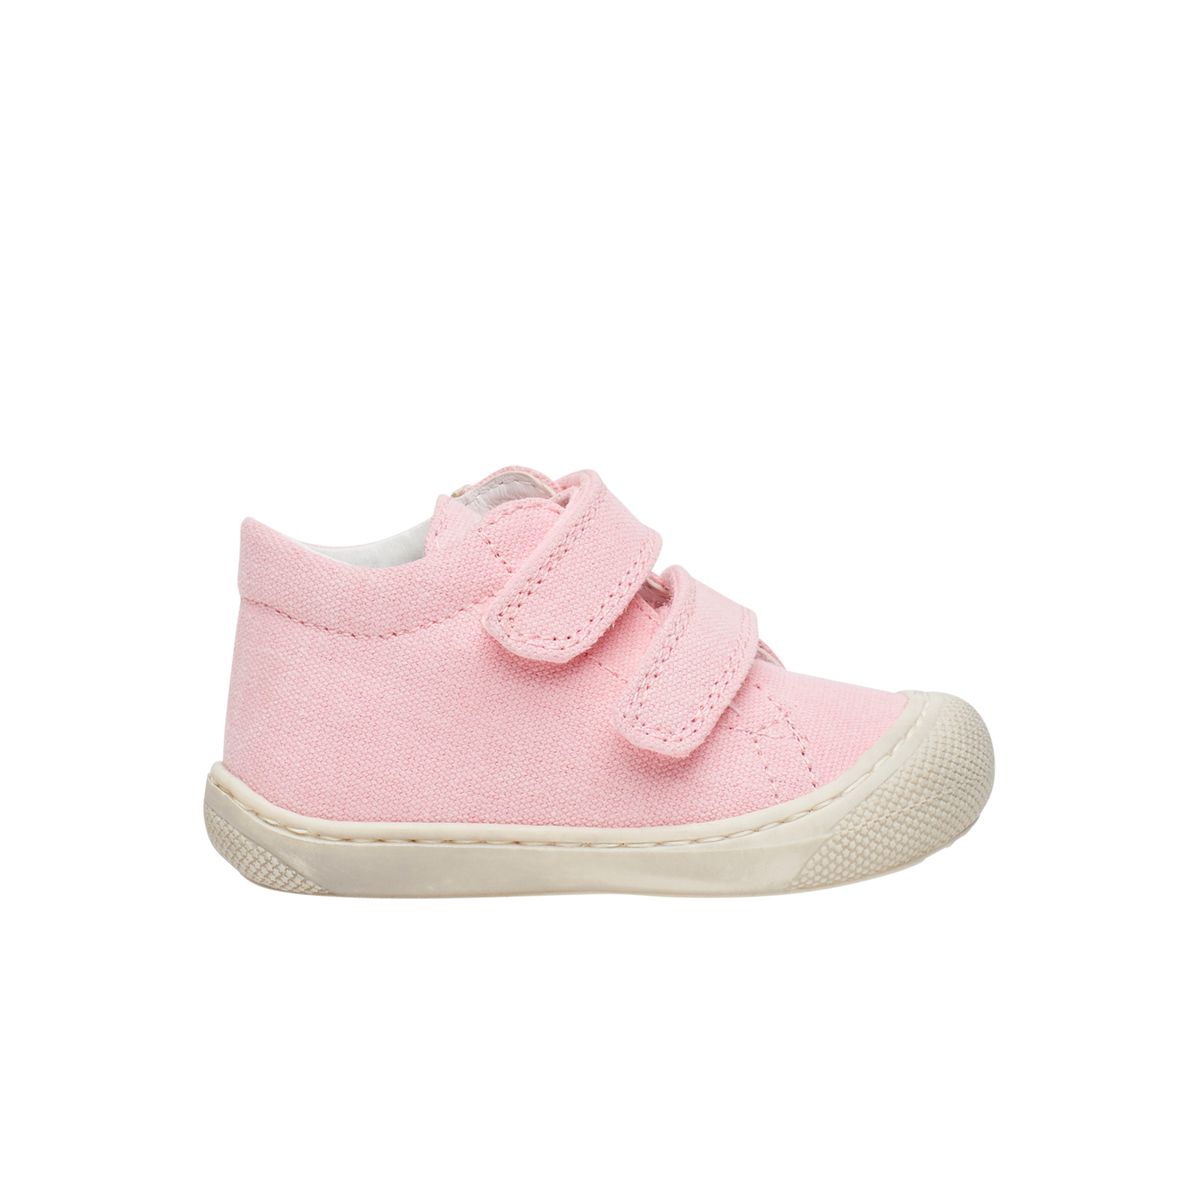 Chaussures Fille Taille 18 La Redoute